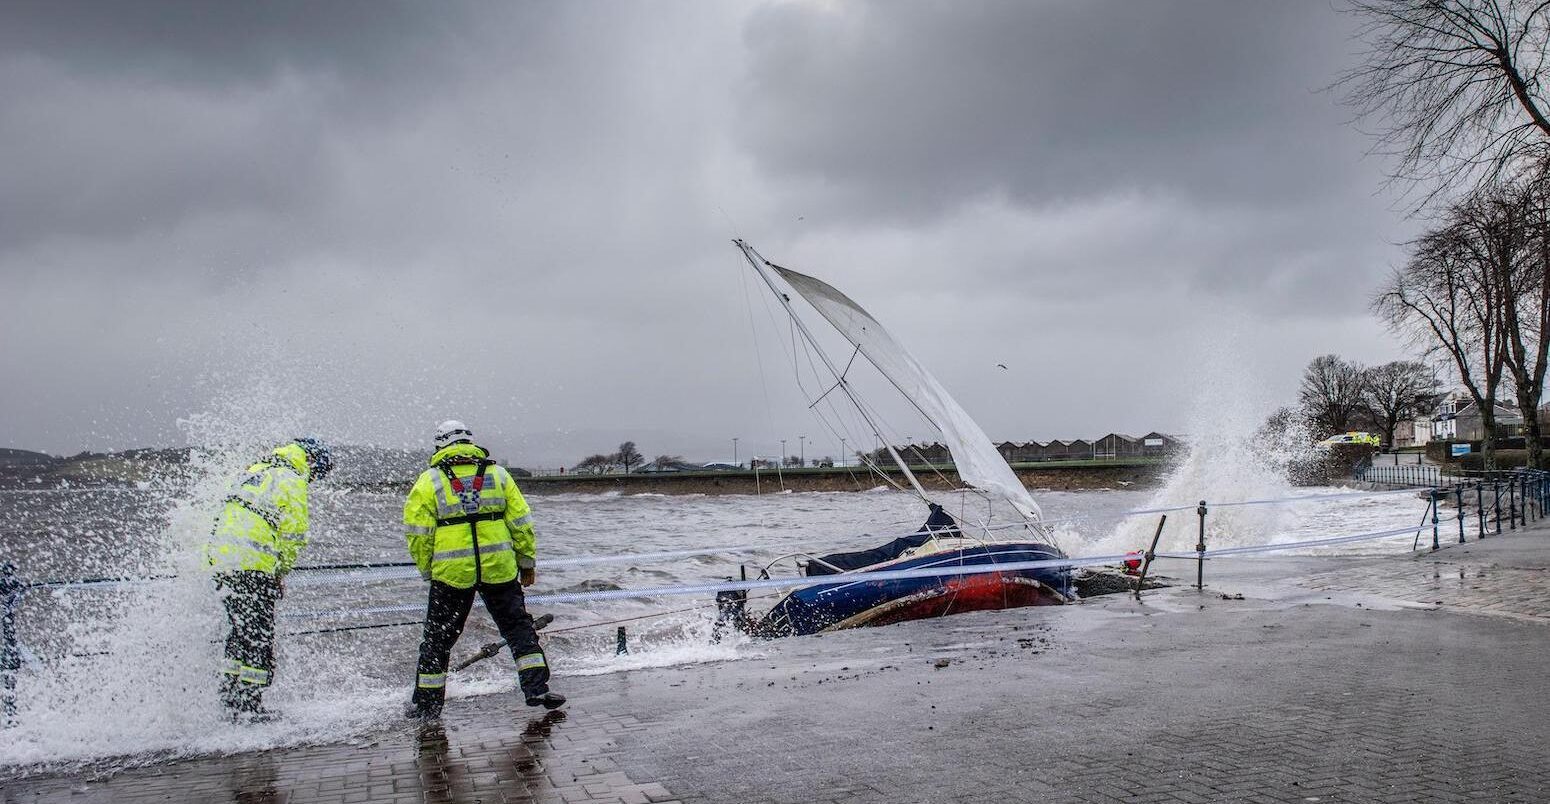 Yacht washed ashore and grounded during Storm Ciara at Cardwell Bay, Gourock, UK with H M Coastguard in attendance